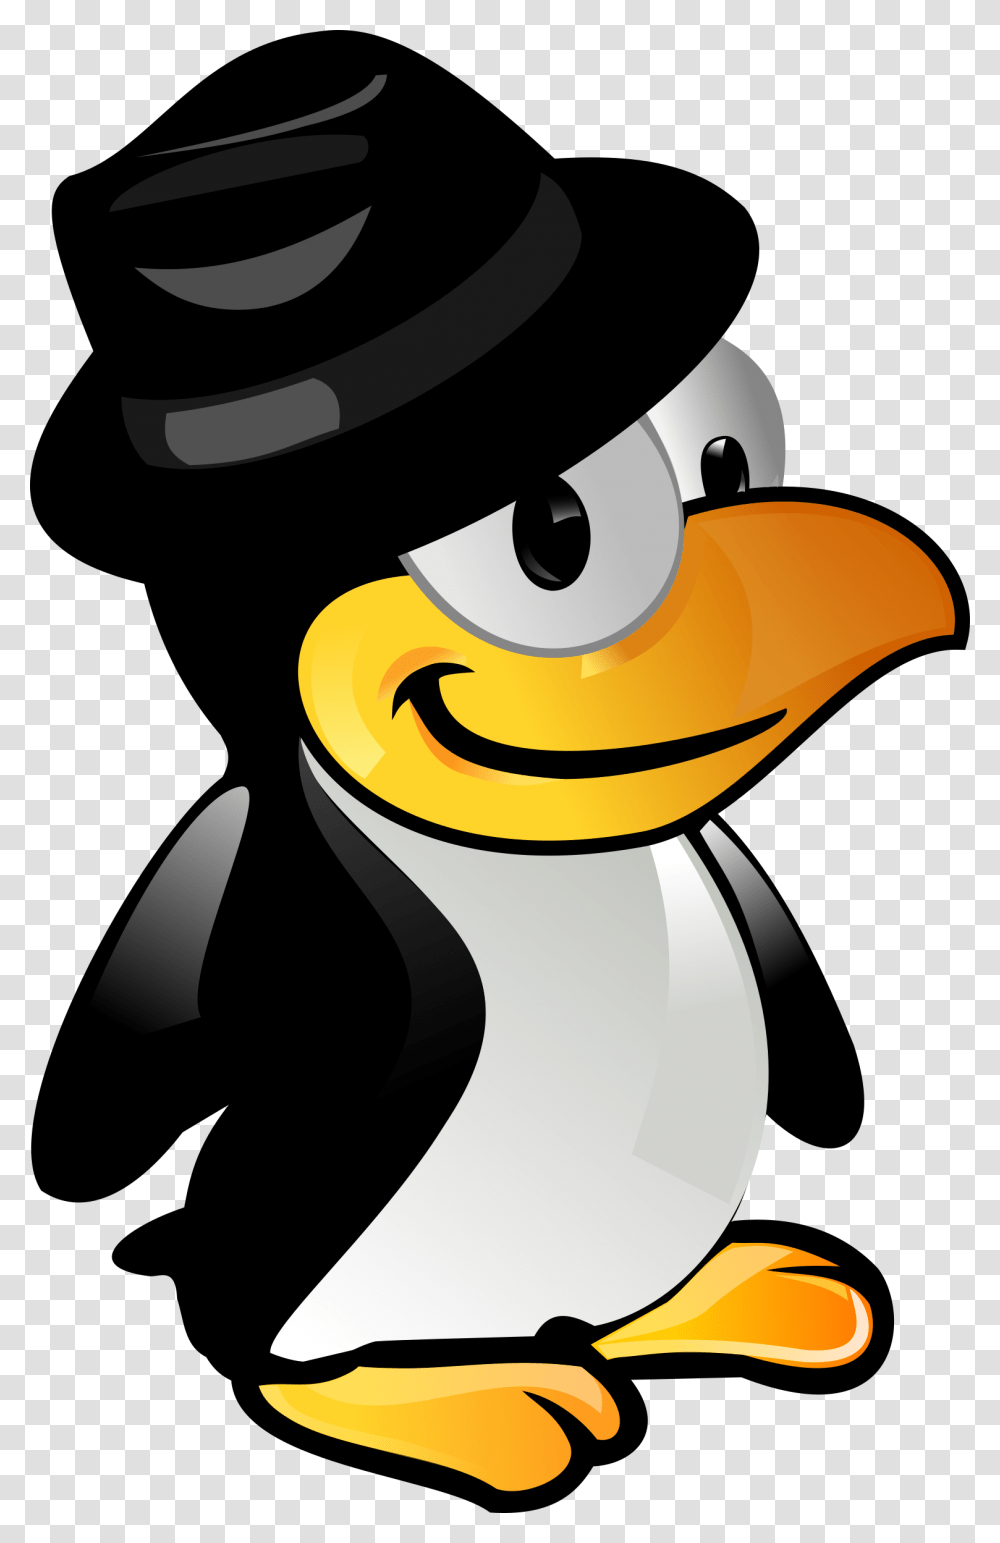 Tux With Black Hat Icons, Penguin, Bird, Animal, King Penguin Transparent Png